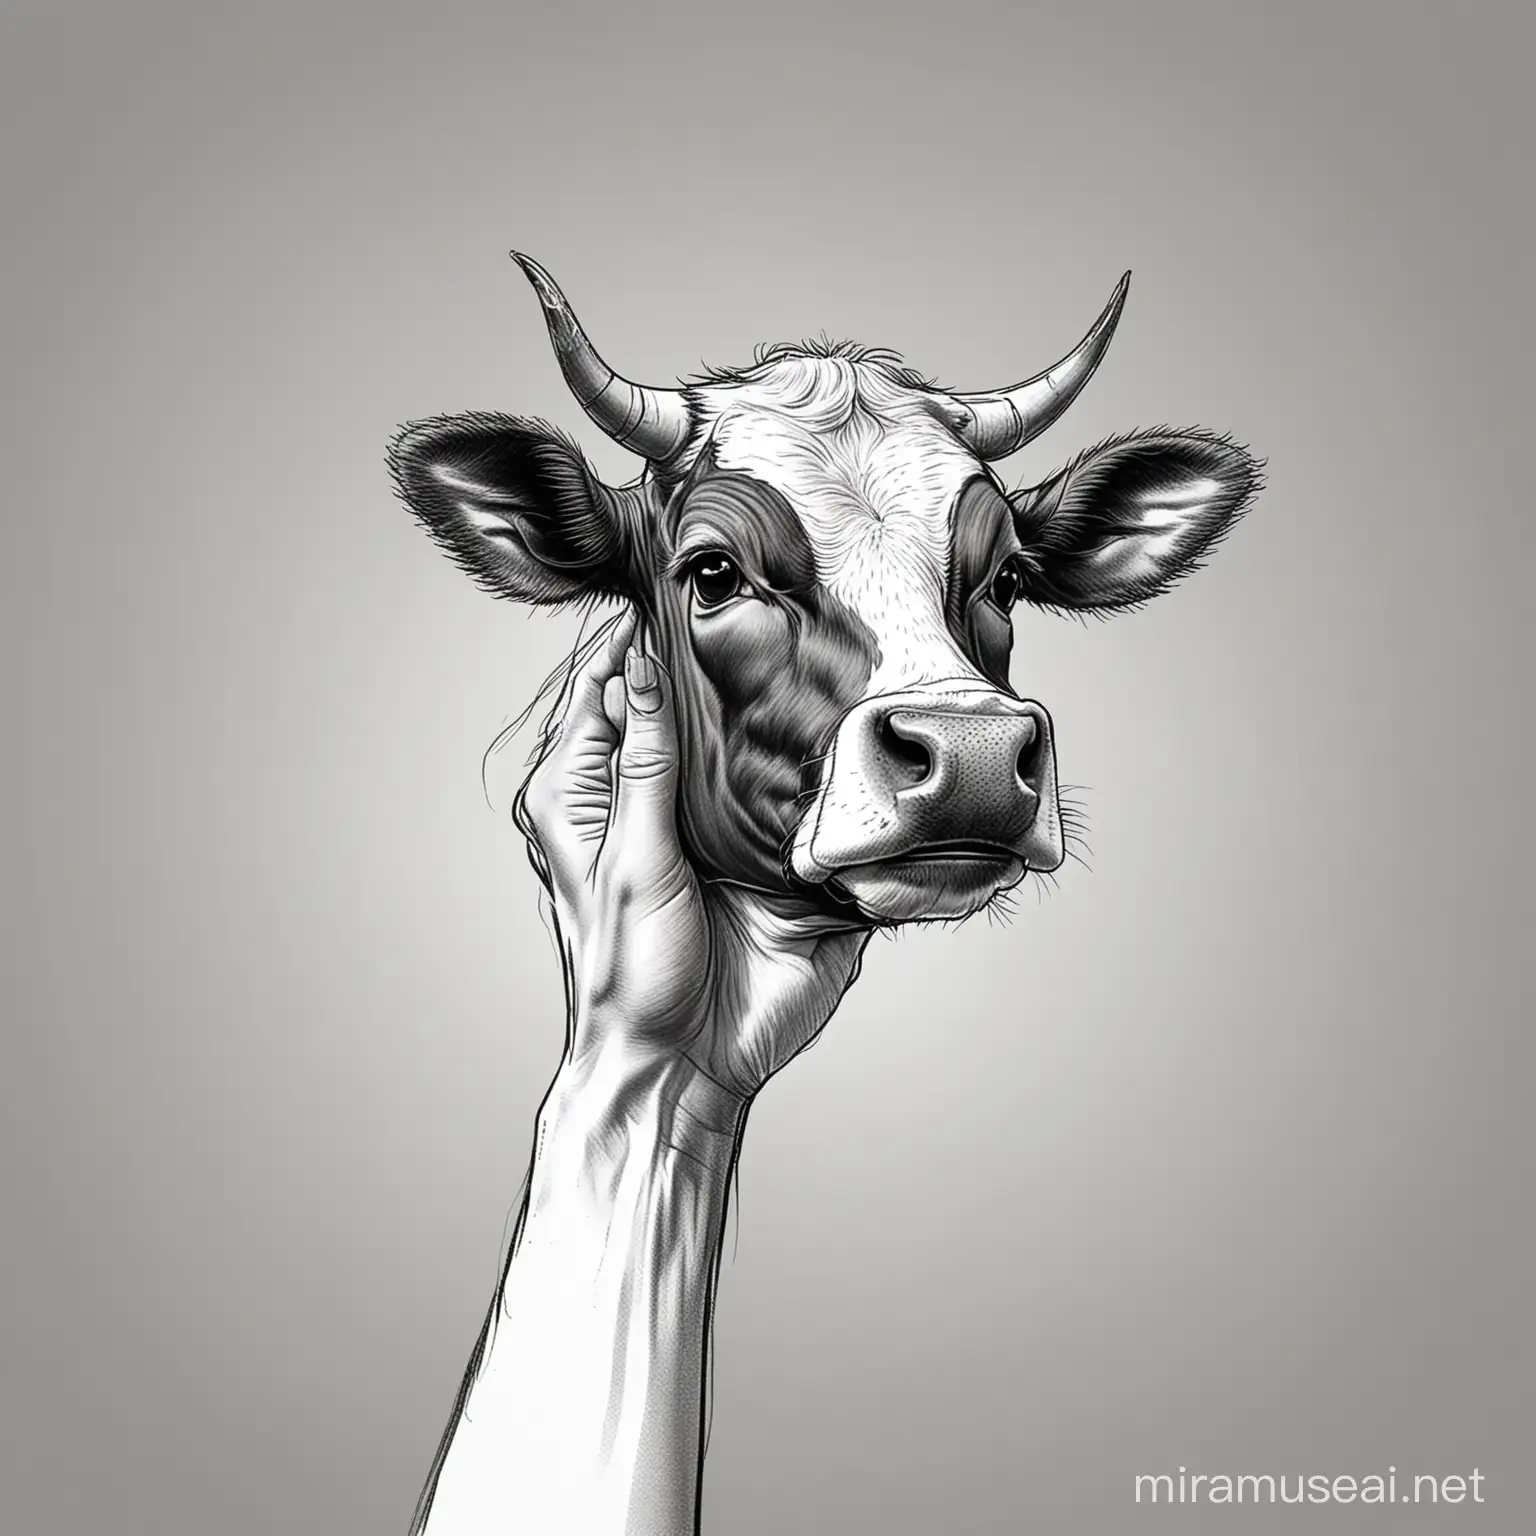 black and white, line art, cartoon, arm with a cow hand